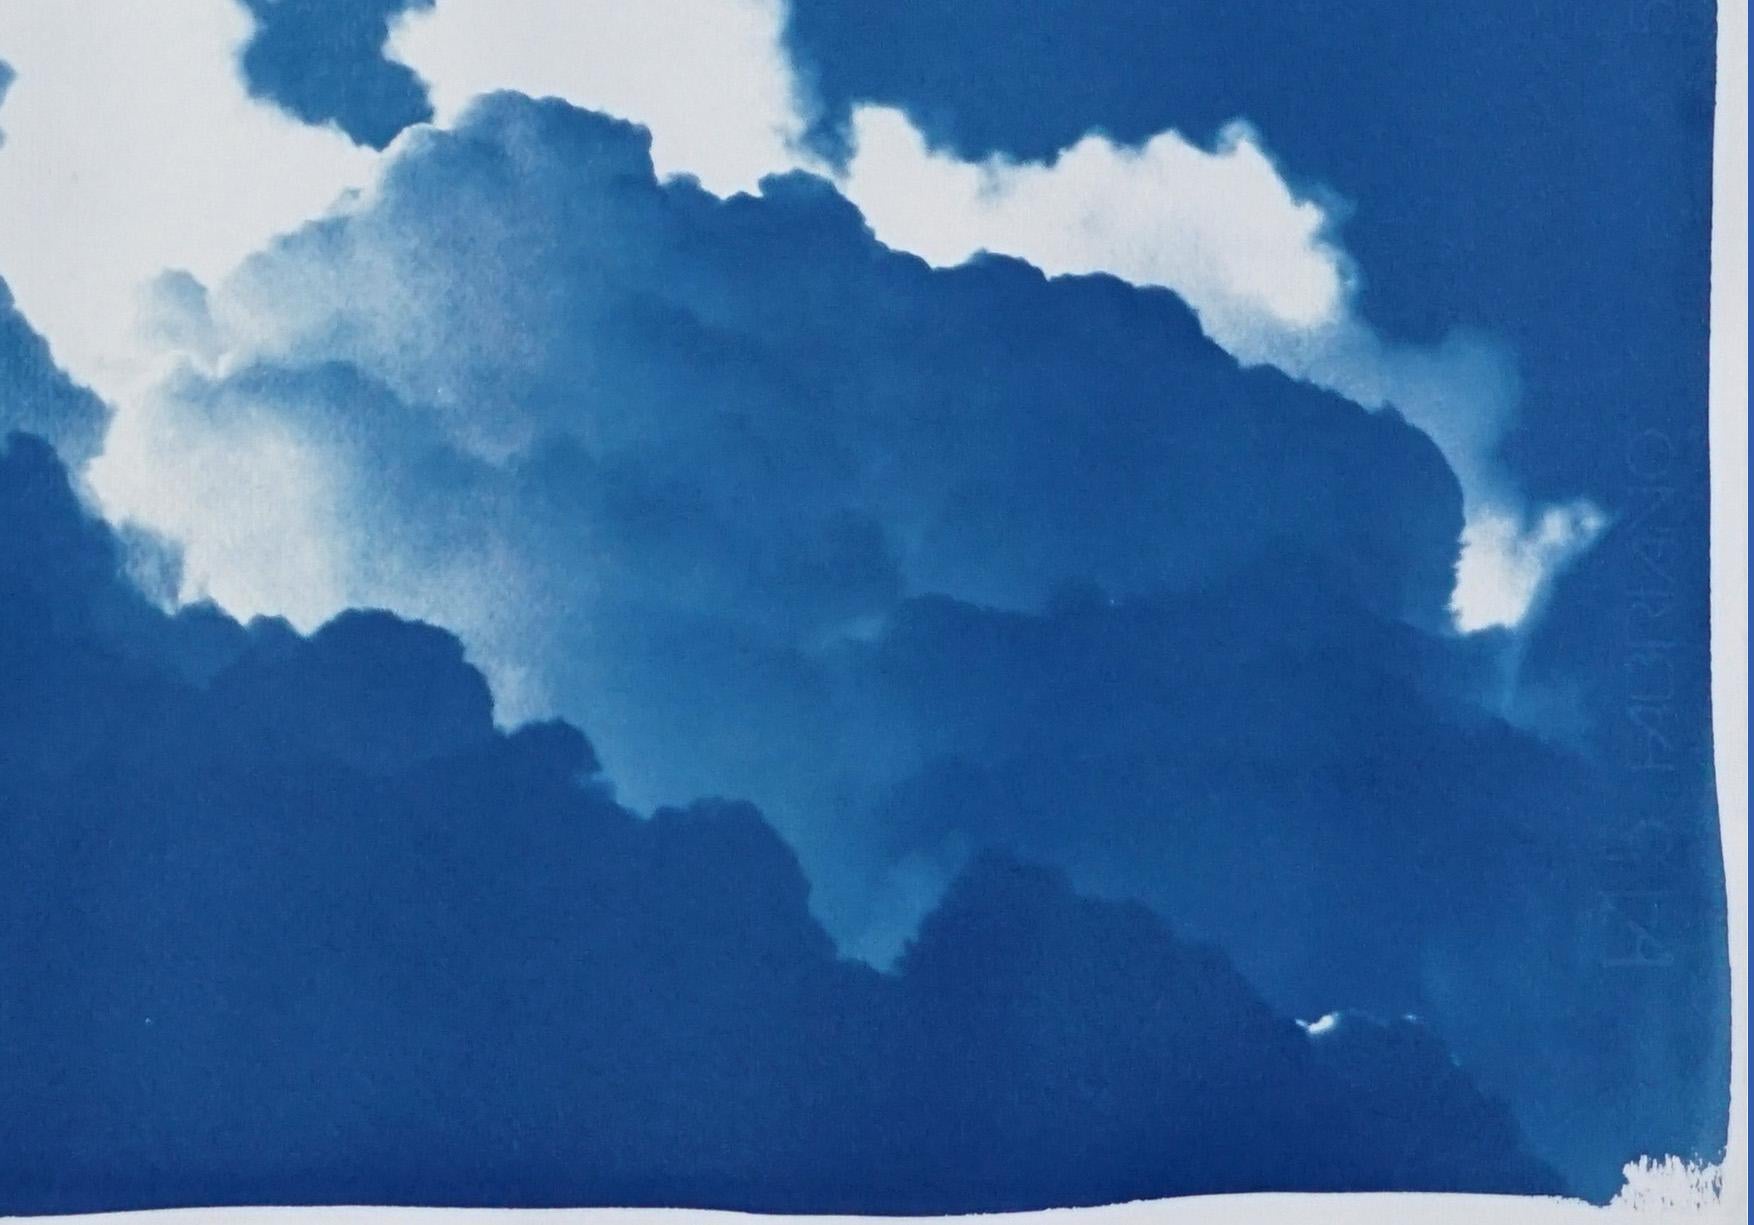 Exclusive limited edition cyanotype diptych.
Details:
+ Title: Azure Clouds
+ Year: 2021
+ Edition Size: 20
+ Stamped and Certificate of Authenticity provided
+ Measurements : 100x210 cm (40 x 84 in.) Each paper measures 70x100 cm (28x 40 in.) each,